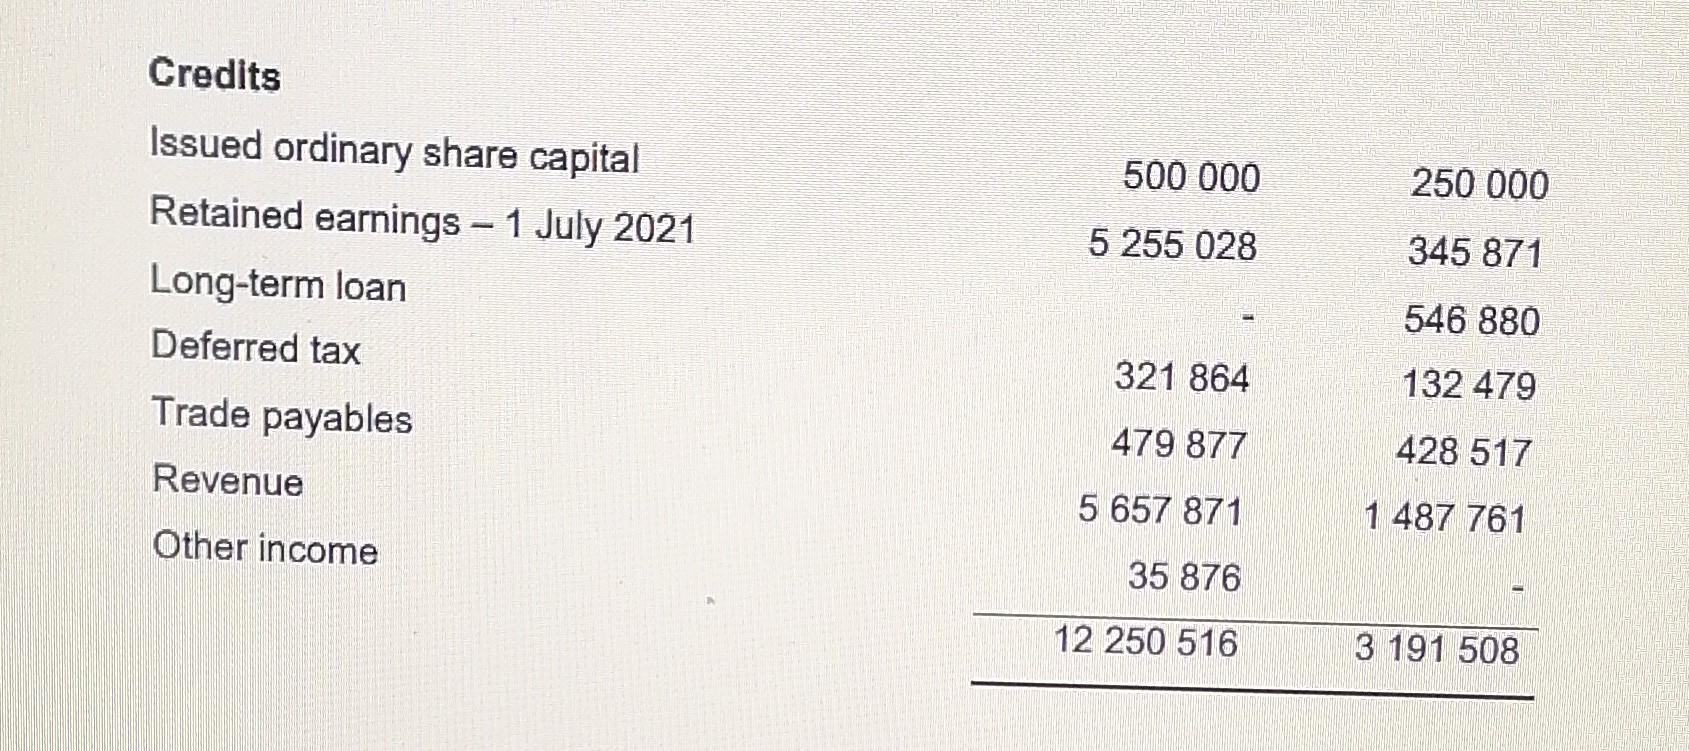 Credits Issued ordinary share capital Retained earnings - 1 July 2021 Long-term loan Deferred tax Trade payables Revenue beg